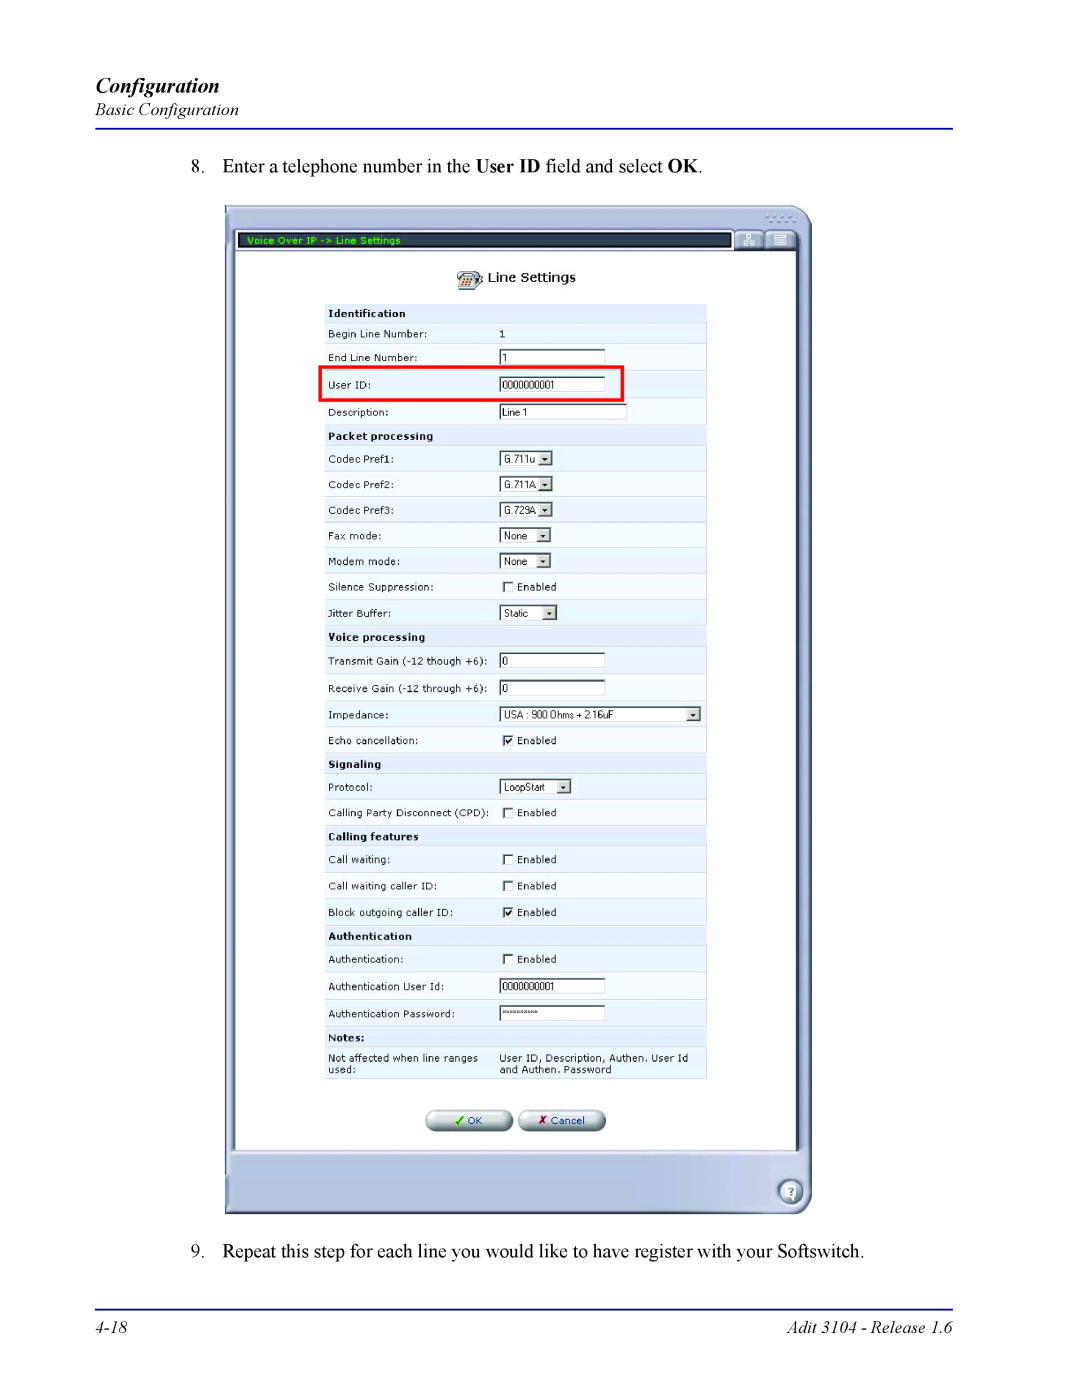 Carrier Access Adit 3104 user manual Configuration, Enter a telephone number in the User ID field and select OK 